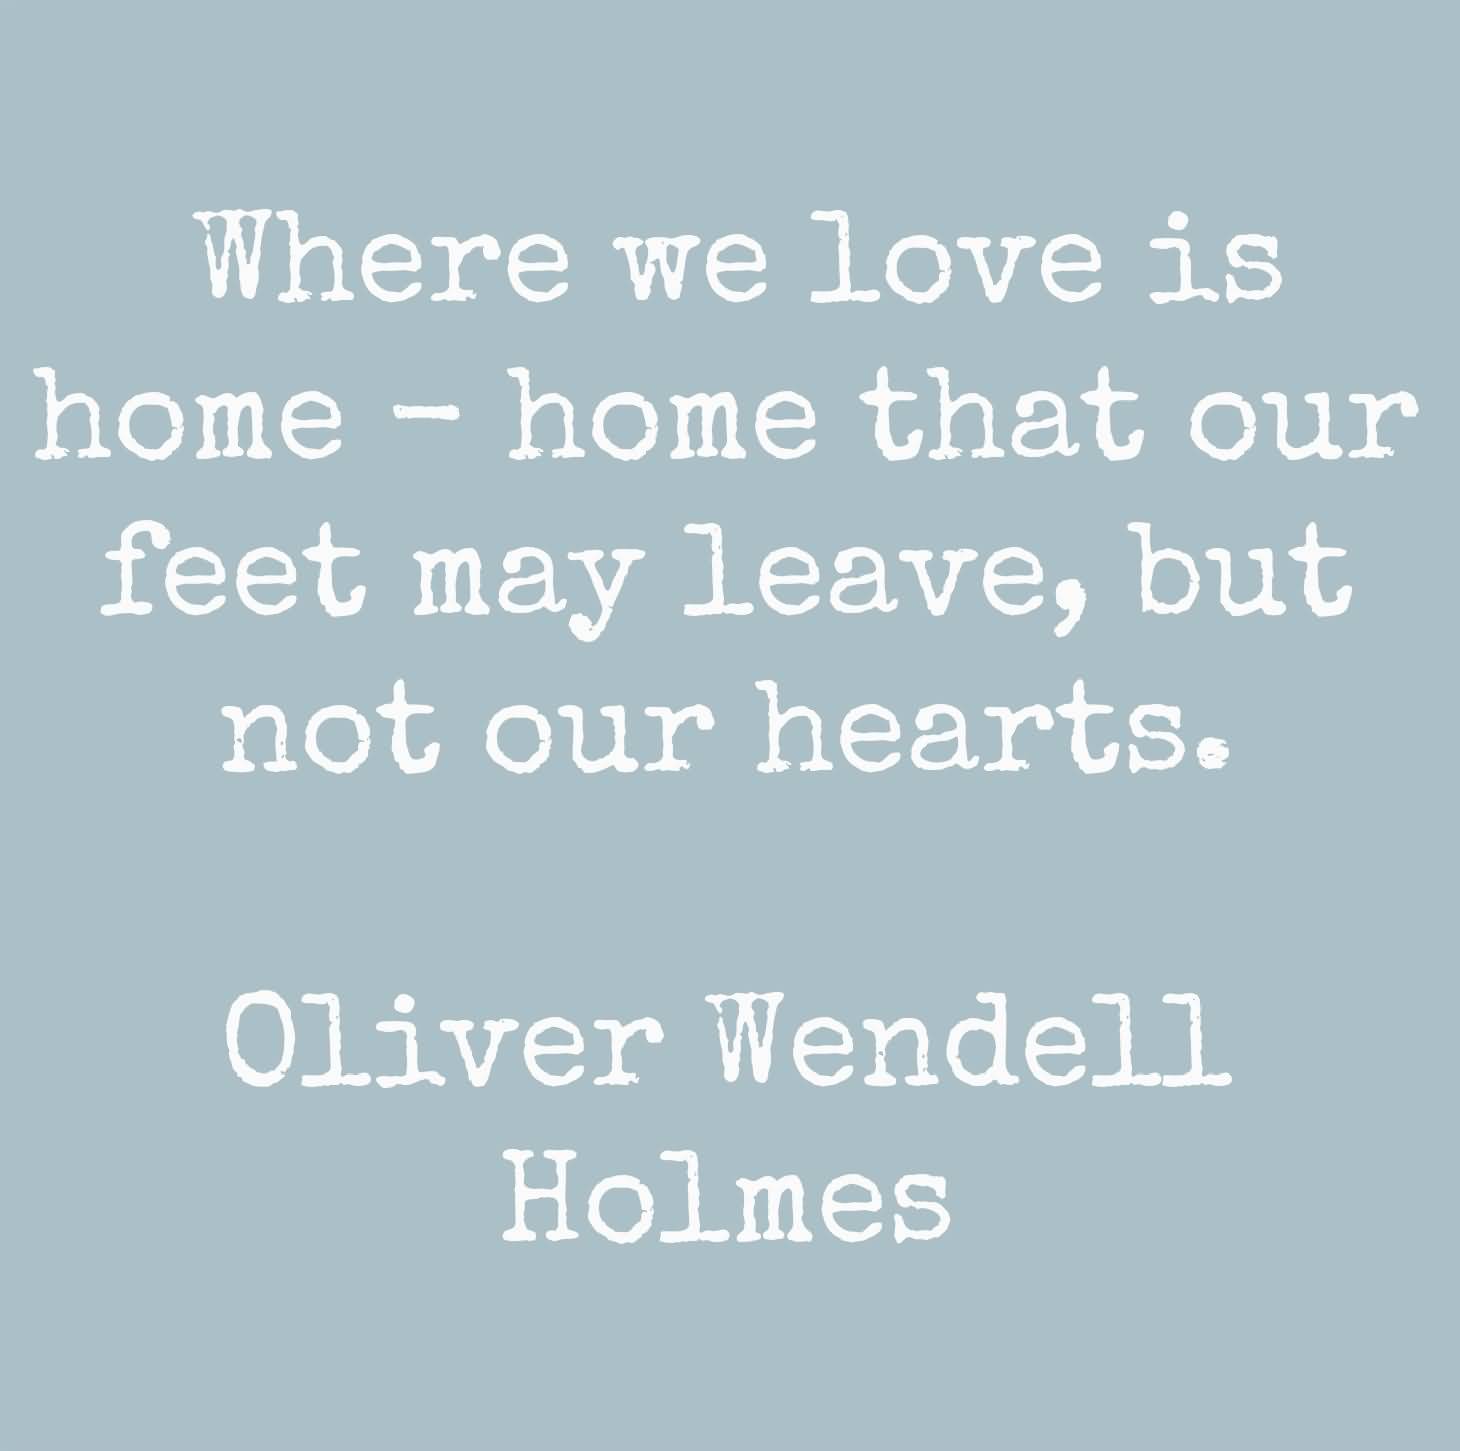 Where we love is home - home that our feet may leave, but not our hearts - Oliver Wendell Holmes, Sr.